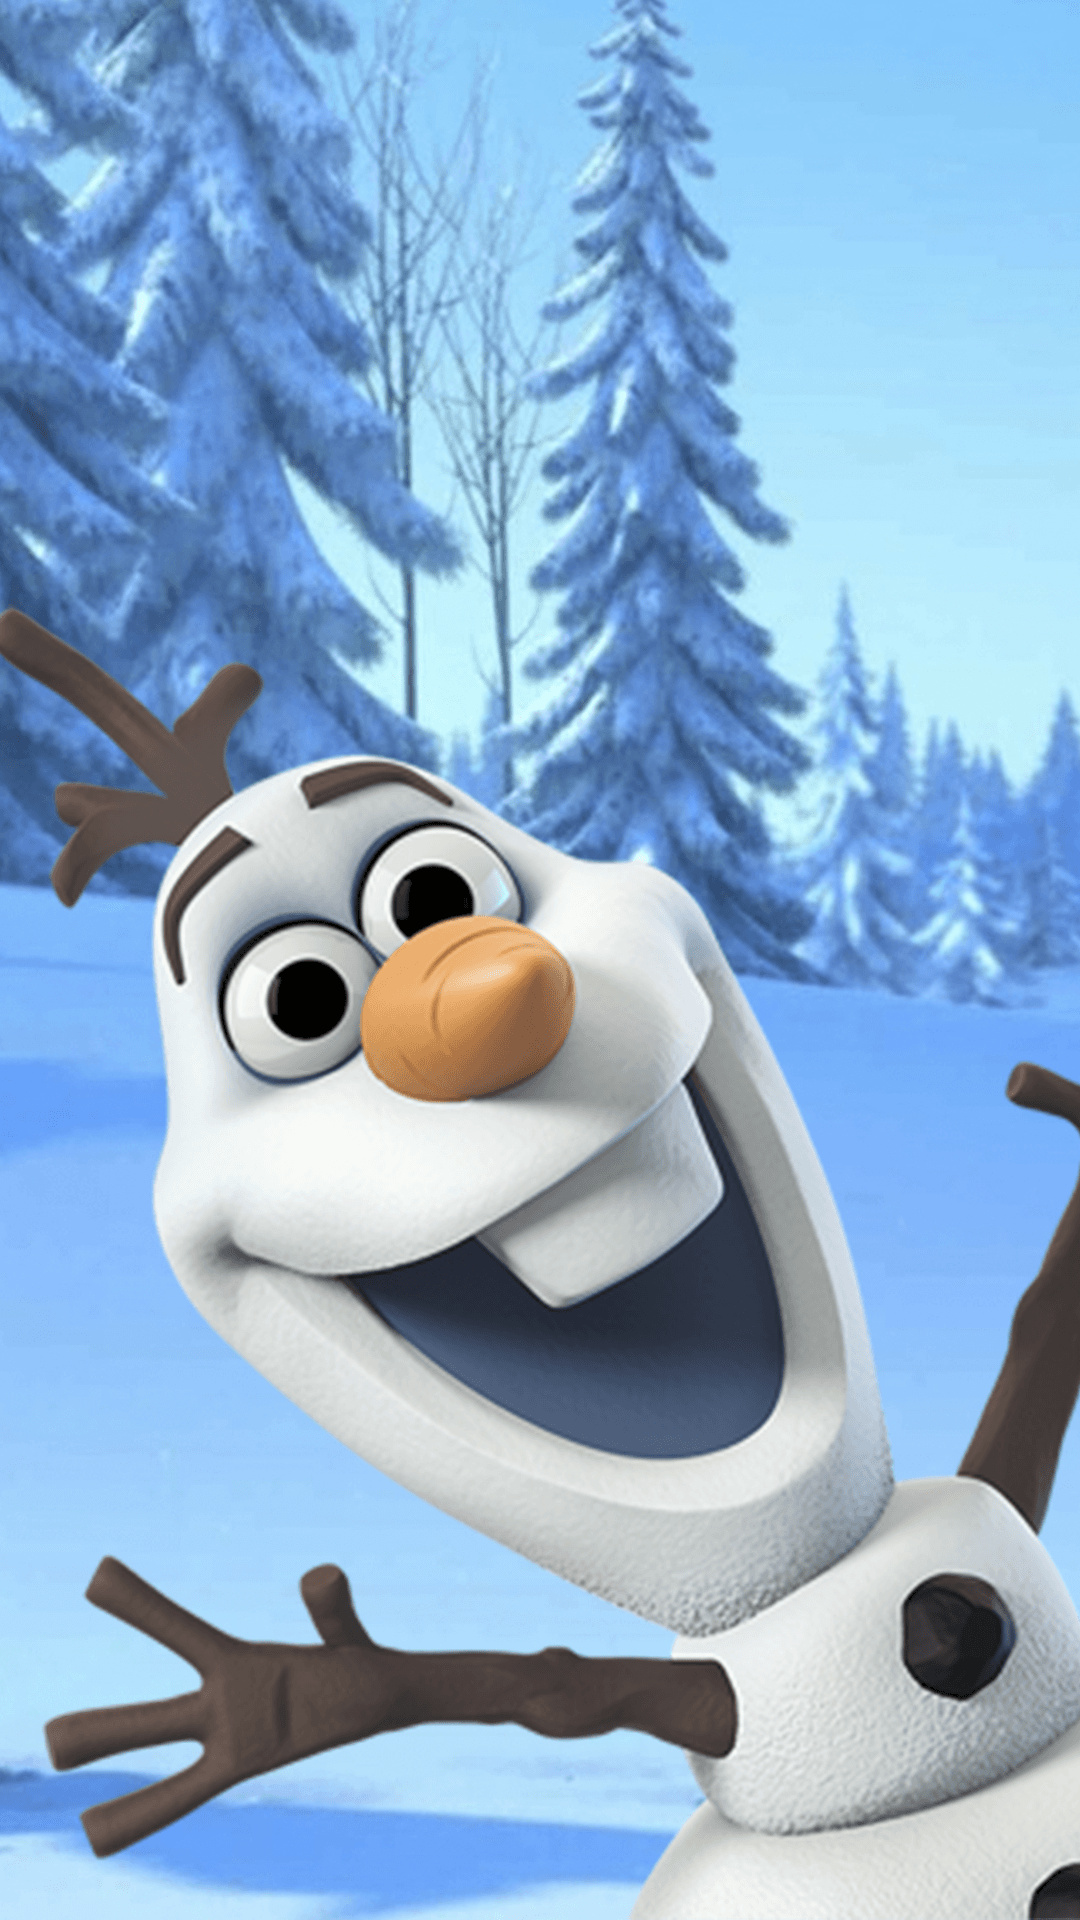 Olaf, Frozen magic, Playful snowman, Whimsical personality, 1080x1920 Full HD Handy